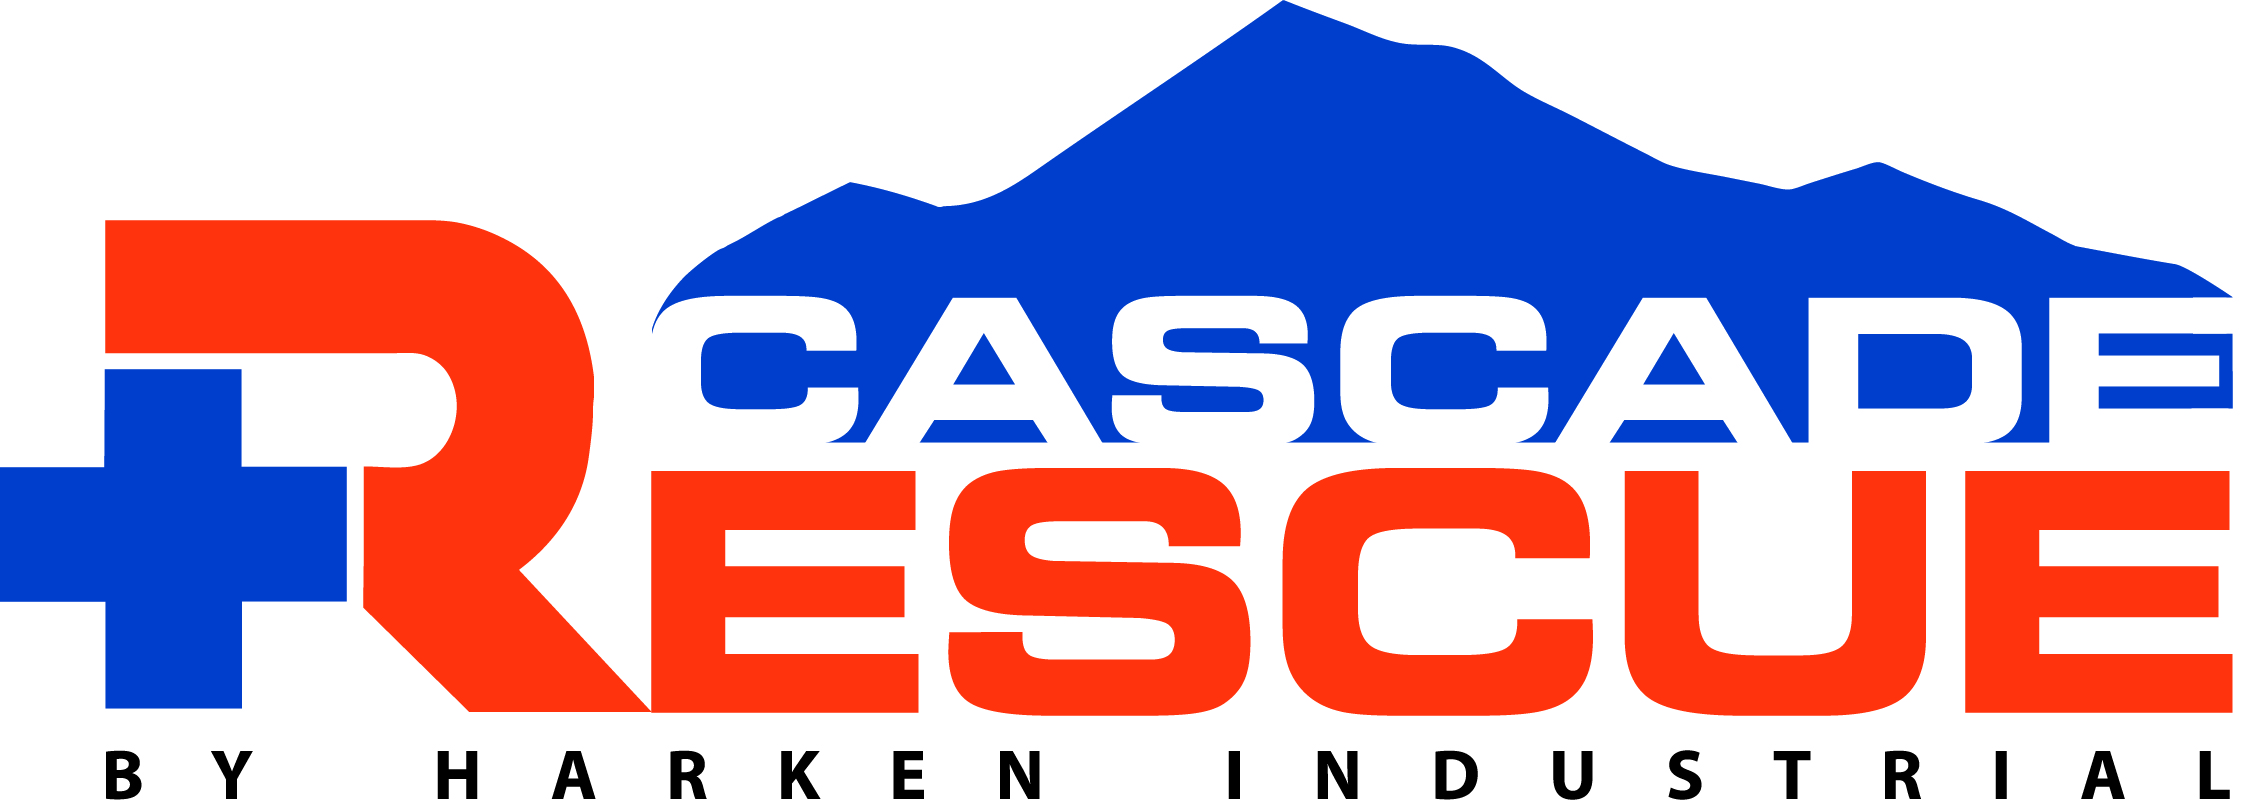 This product's manufacturer is Cascade Rescue